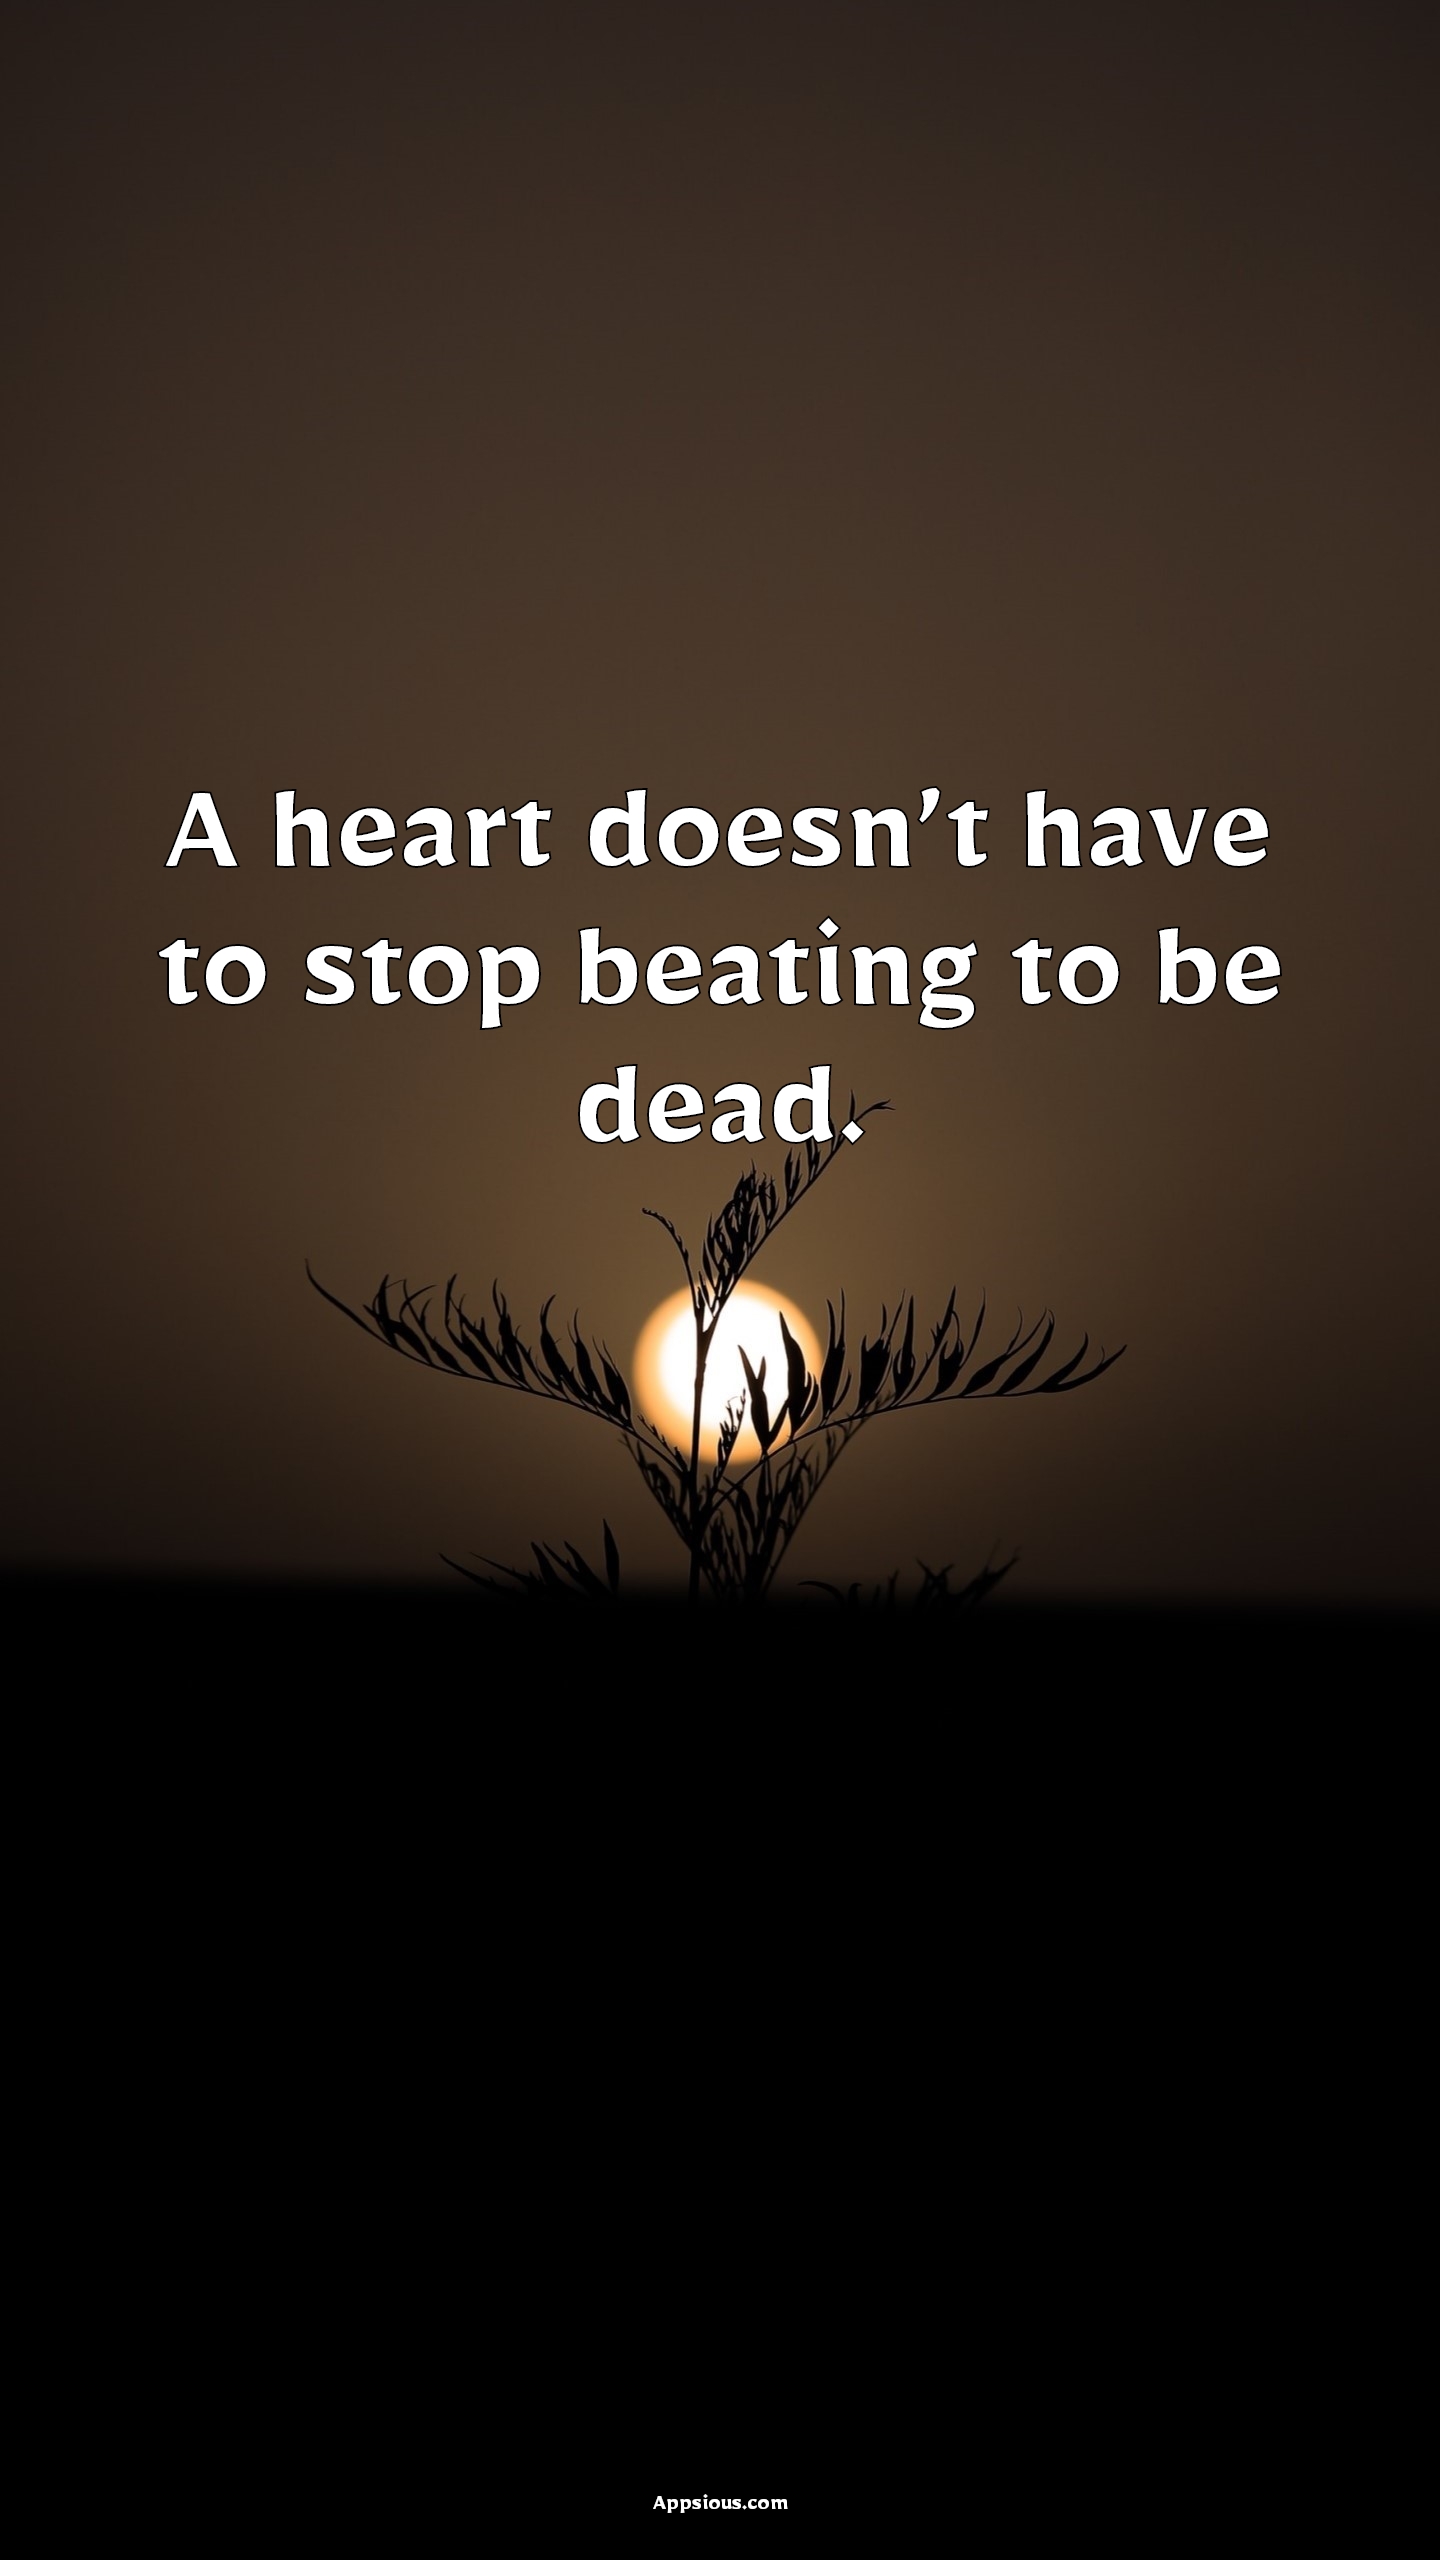 A heart doesn’t have to stop beating to be dead. - quotewis.com